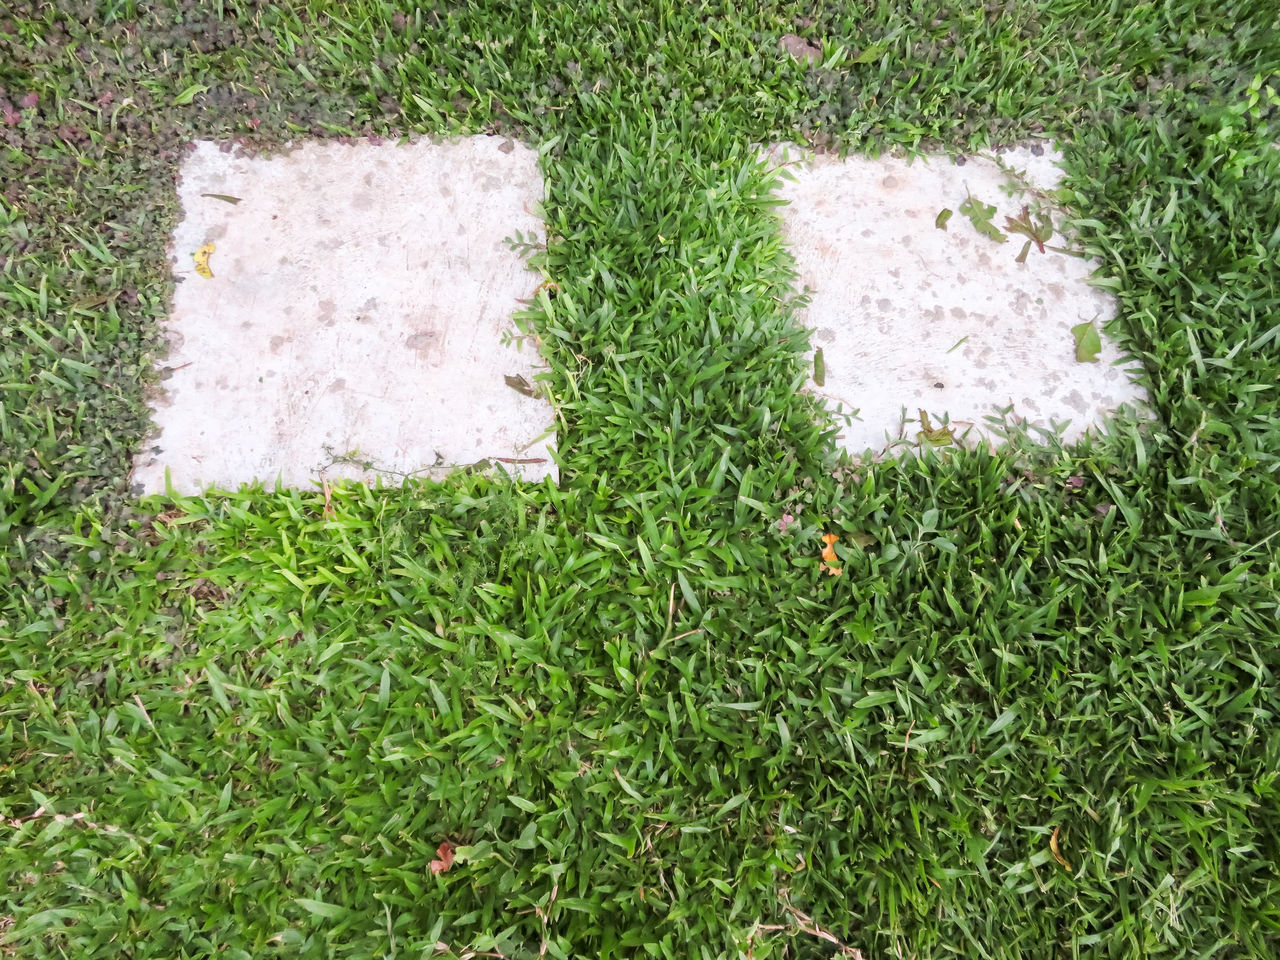 HIGH ANGLE VIEW OF HEART SHAPE ON GRASS